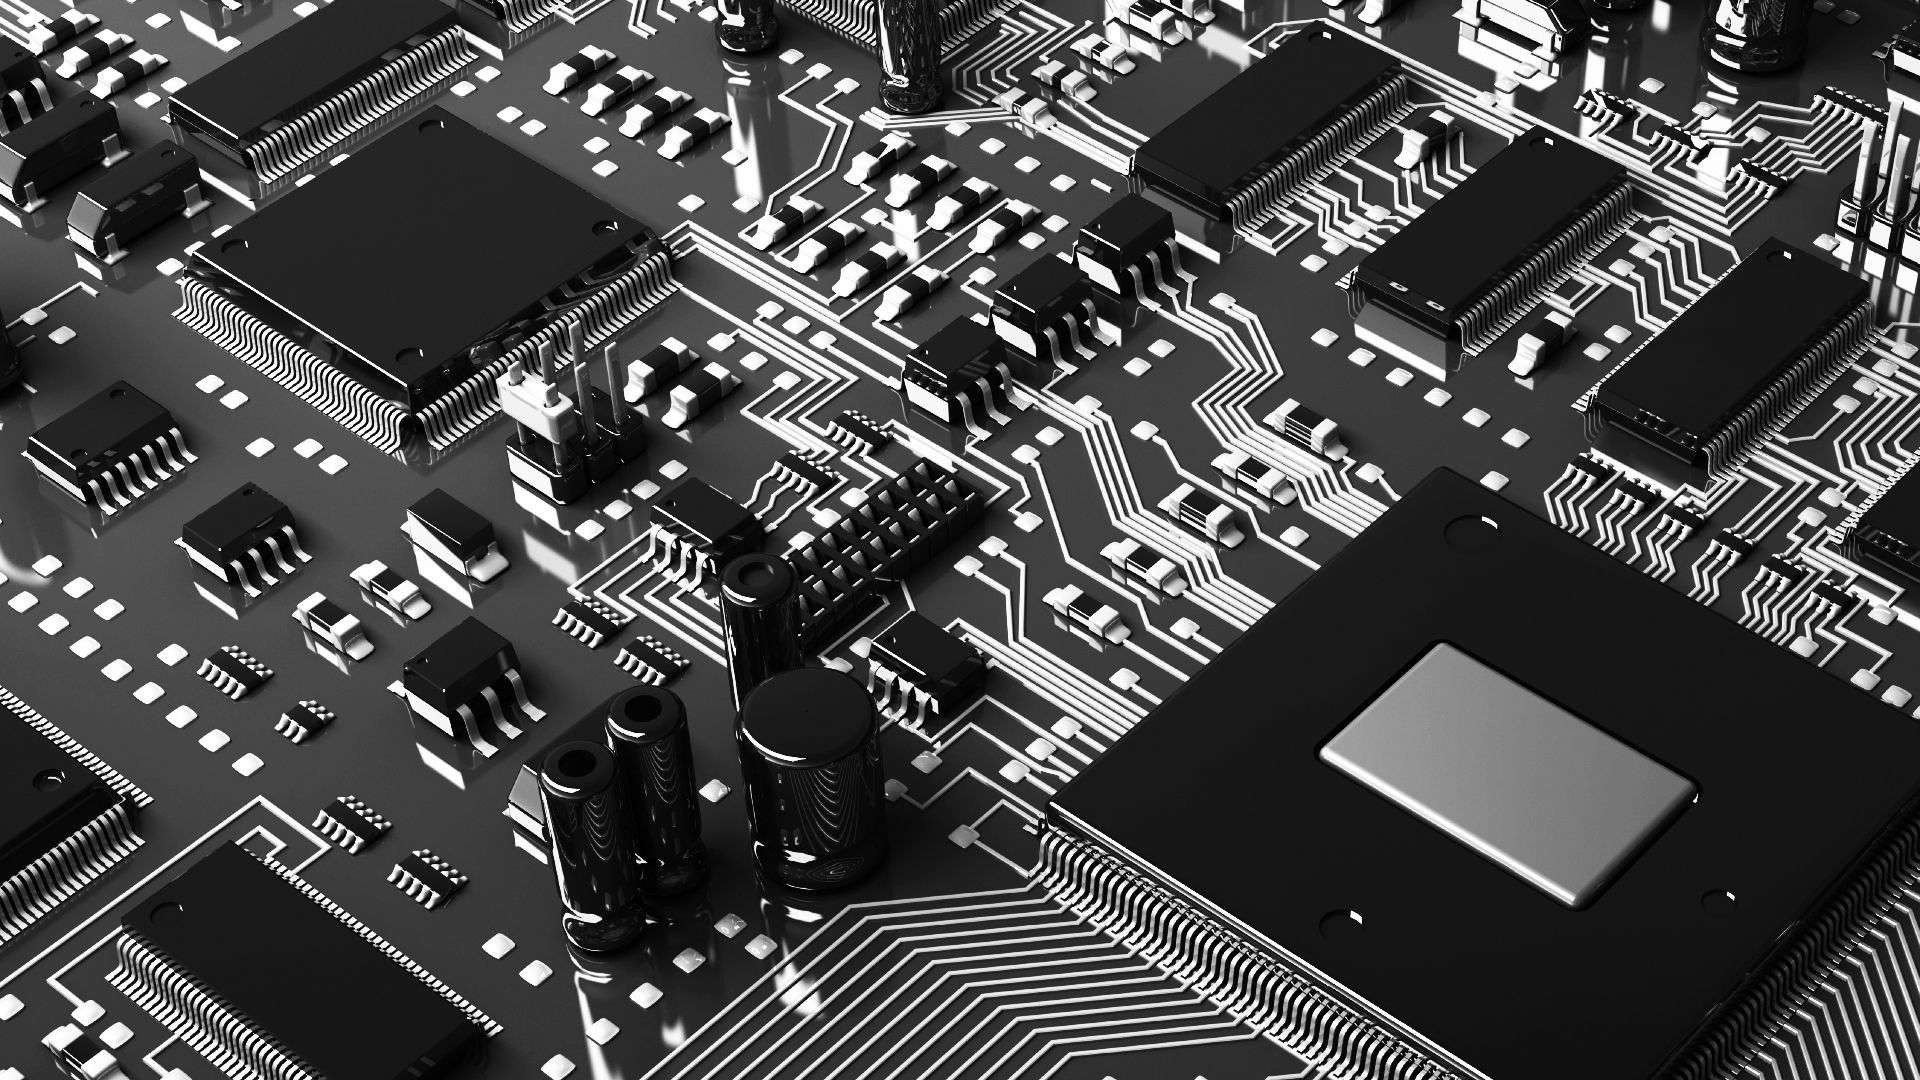 1920x1080 10 Top Circuit Board Wallpaper Hd FULL HD 1080p For PC Background